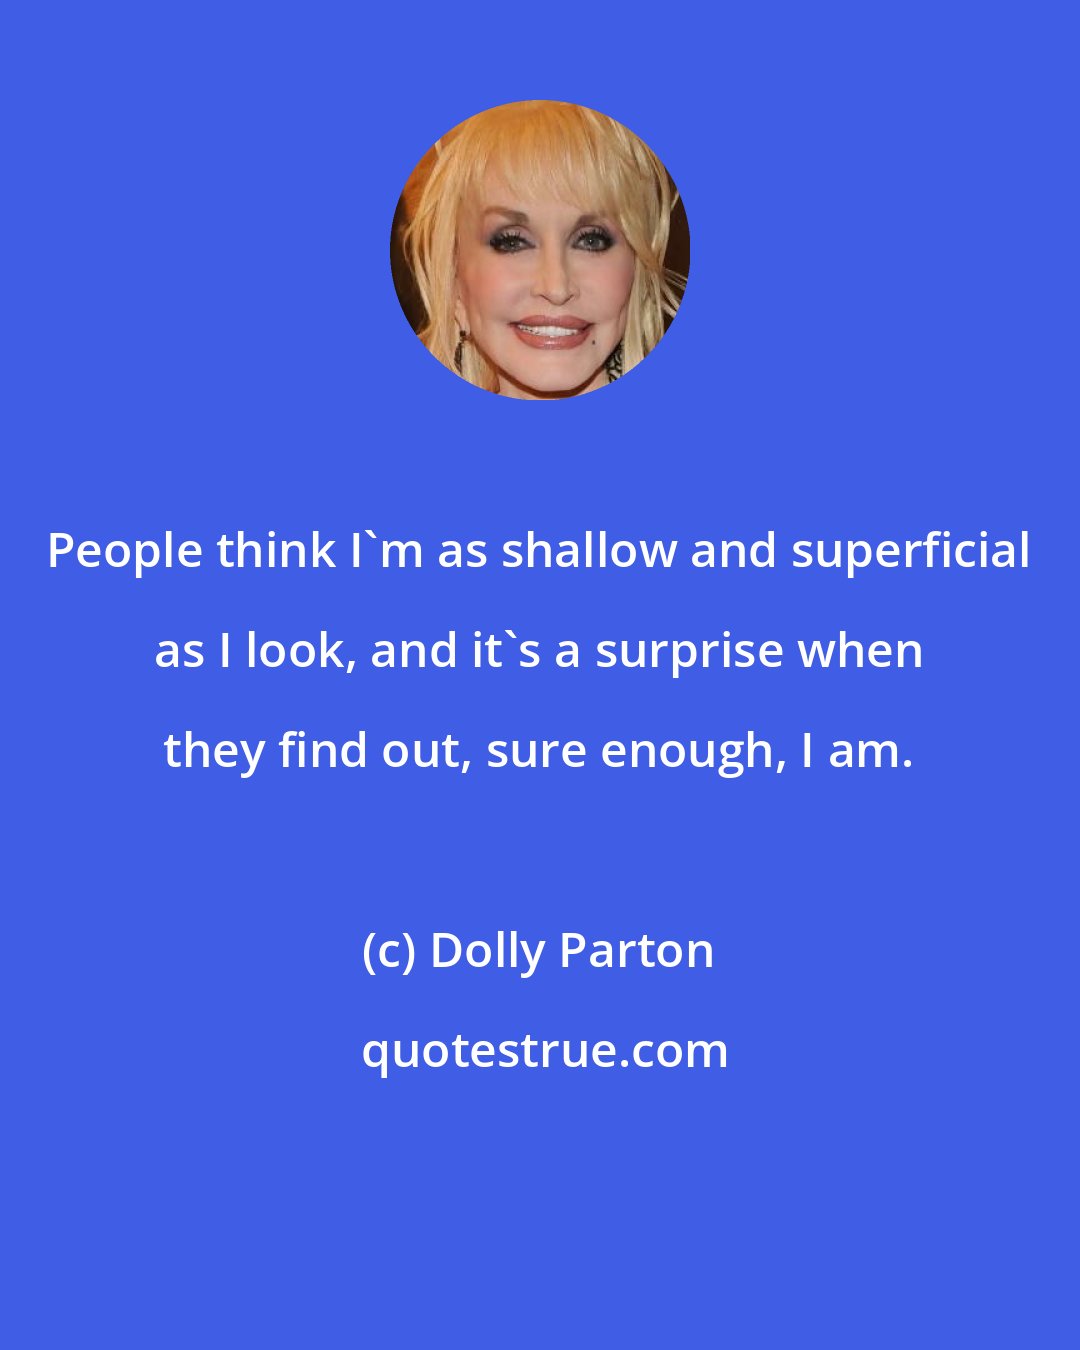 Dolly Parton: People think I'm as shallow and superficial as I look, and it's a surprise when they find out, sure enough, I am.